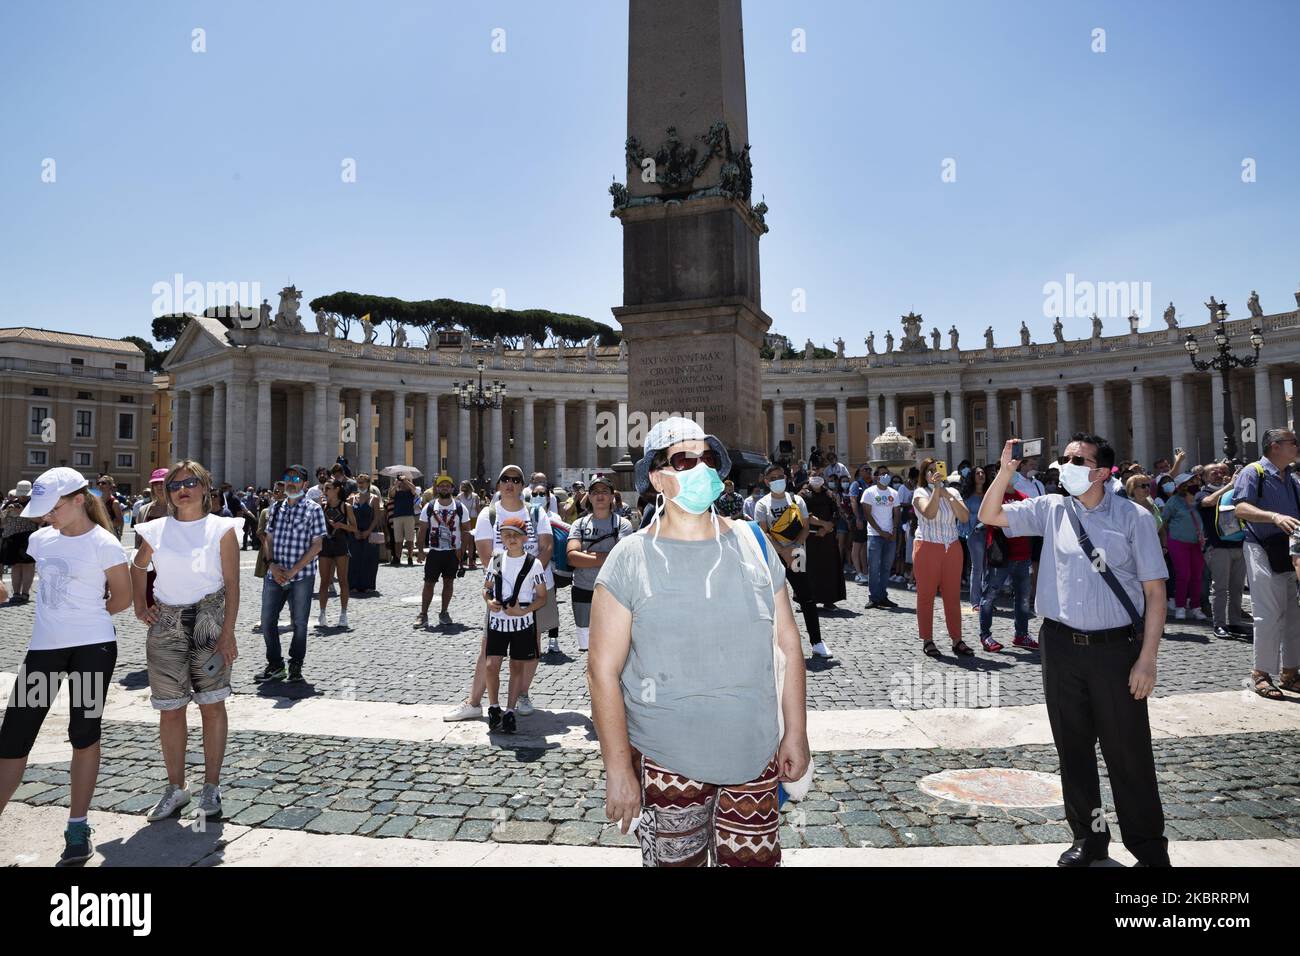 A Belivers with a maskface during the Papst Francis sunday Angelus at San Pietro Square in Vatican City on 28 June in Roma, Italy. (Foto von Matteo Trevisan/NurPhoto) Stockfoto